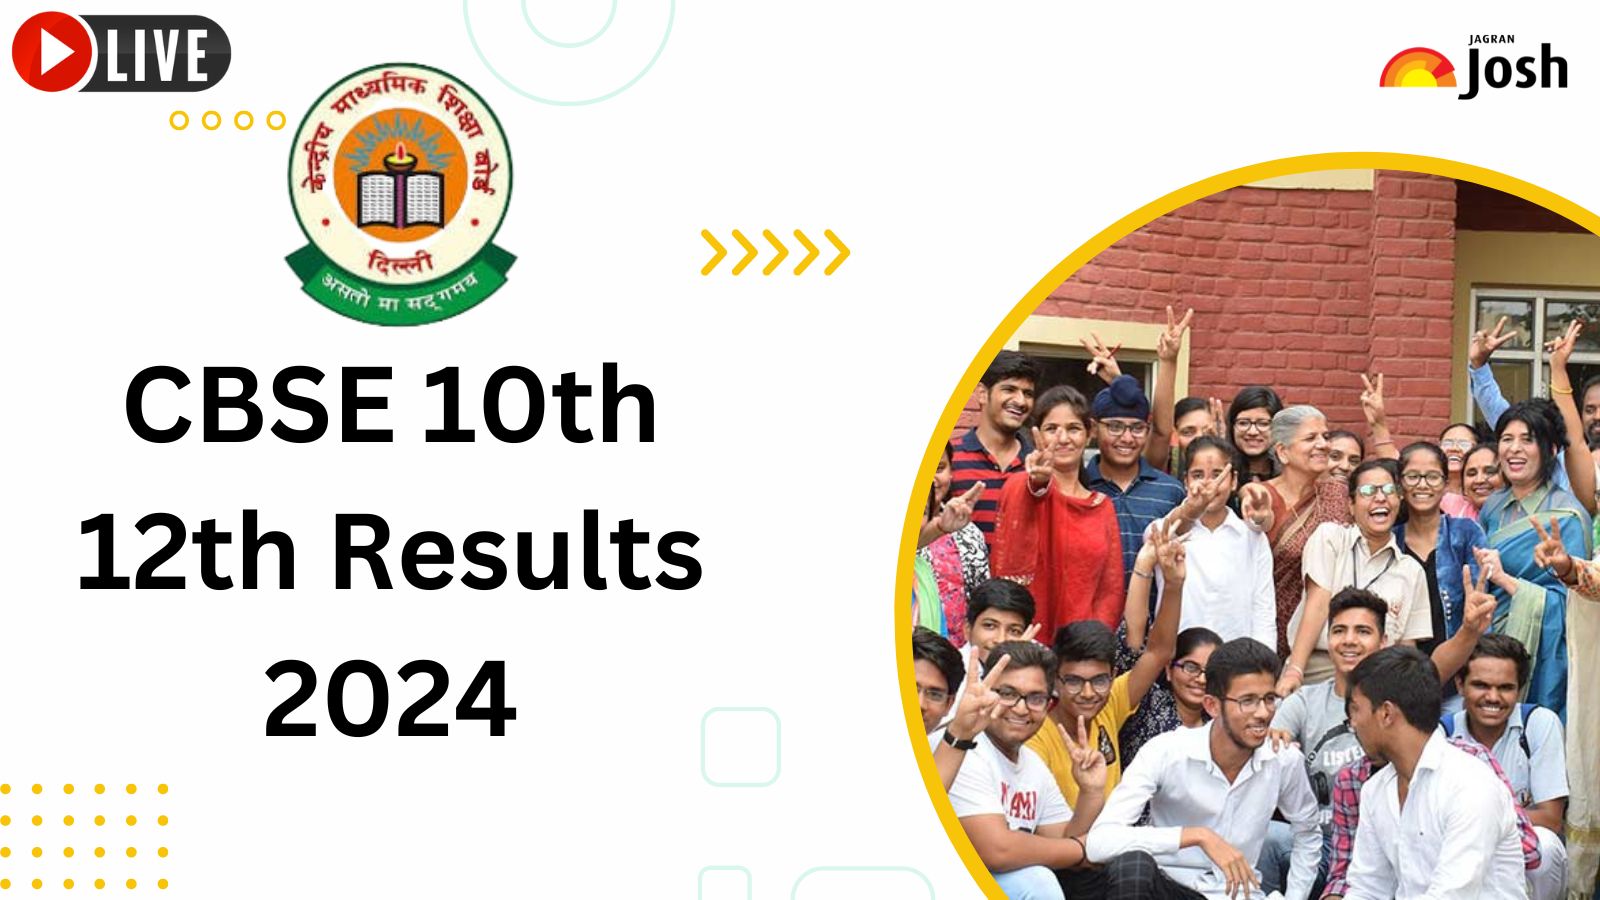  CBSE Board Result 2024 LIVE Updates: Check Class 12th Result Online at cbseresults.nic.in, 10th Results Expected Soon